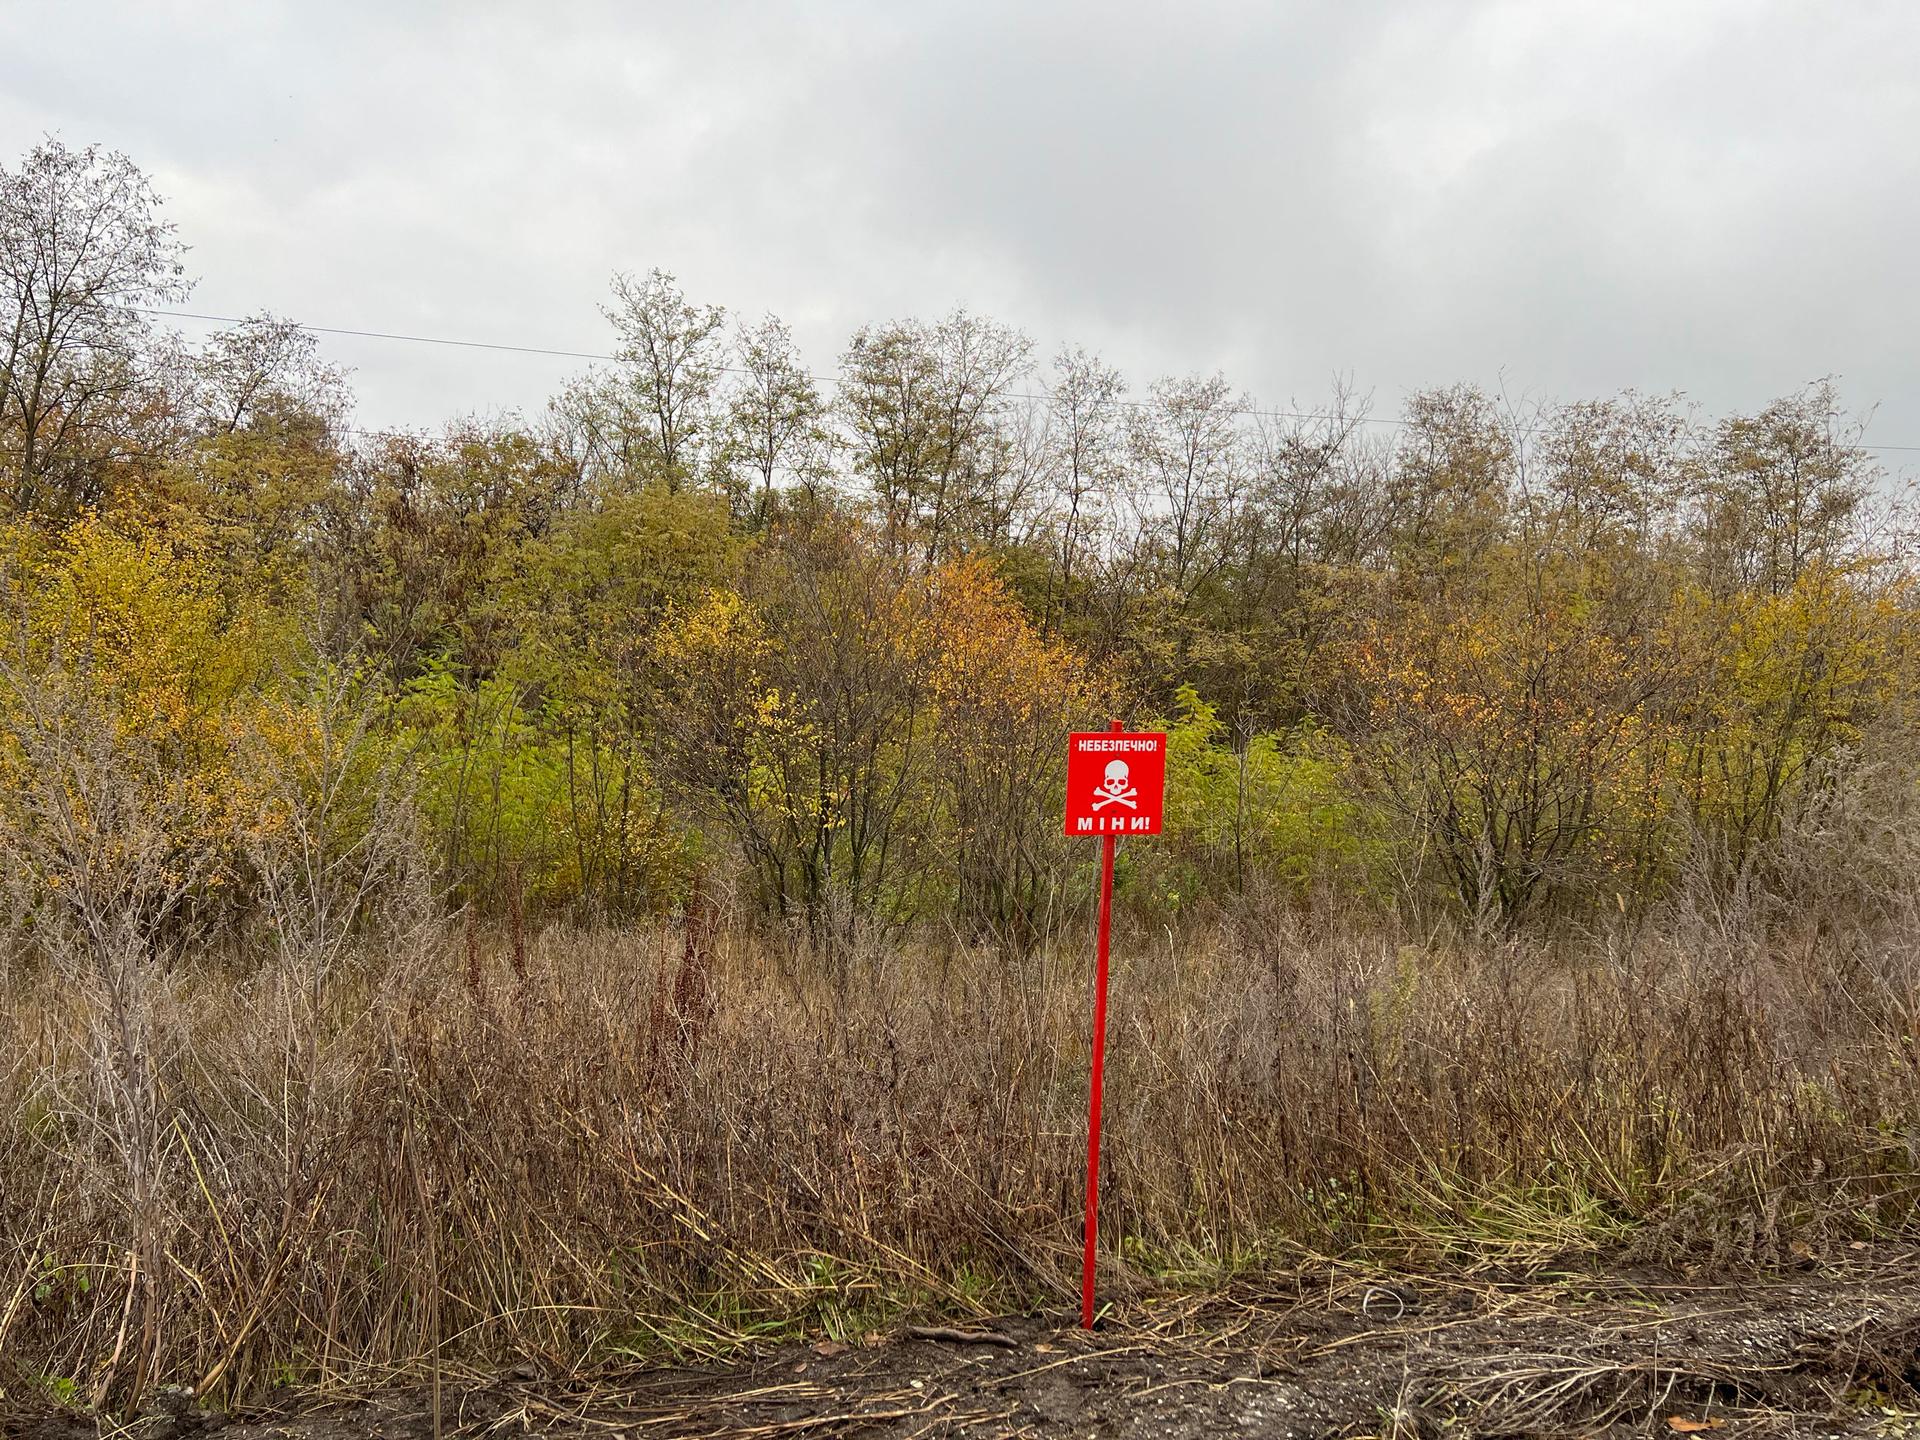 Signs warn of mines left behind by the Russian forces.